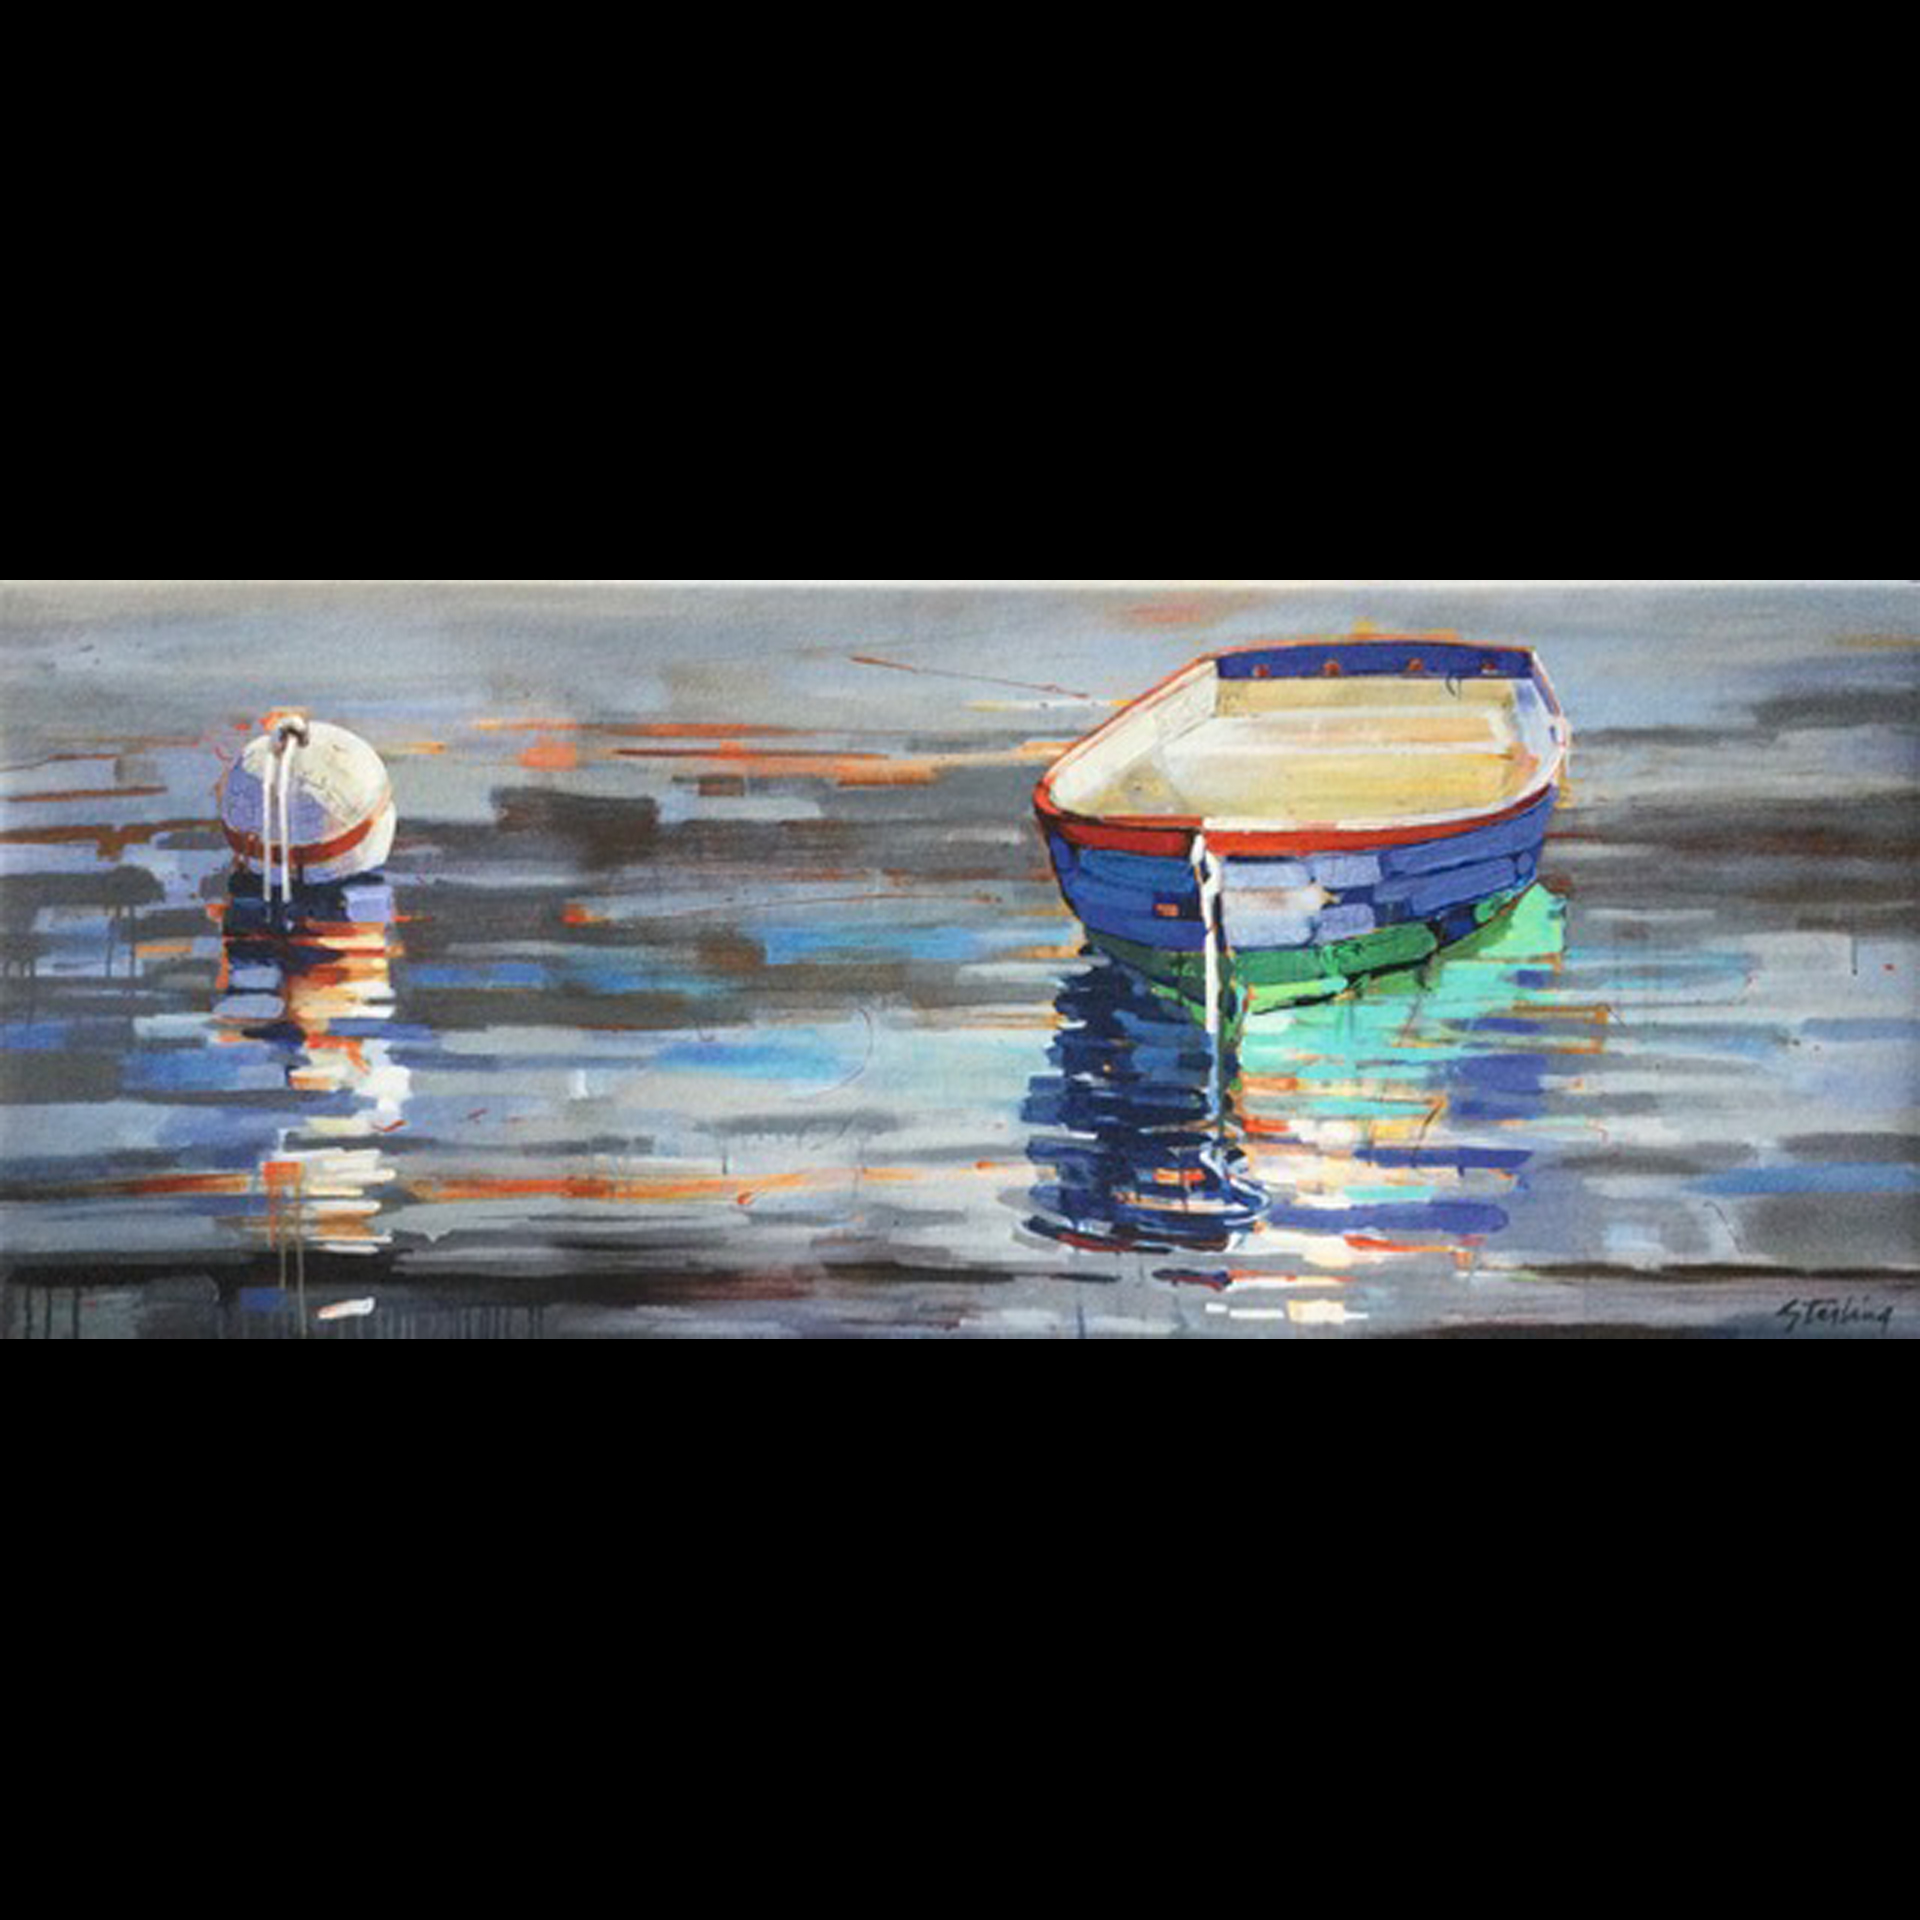 Quiet Time
12x30 giclee on canvas
$230